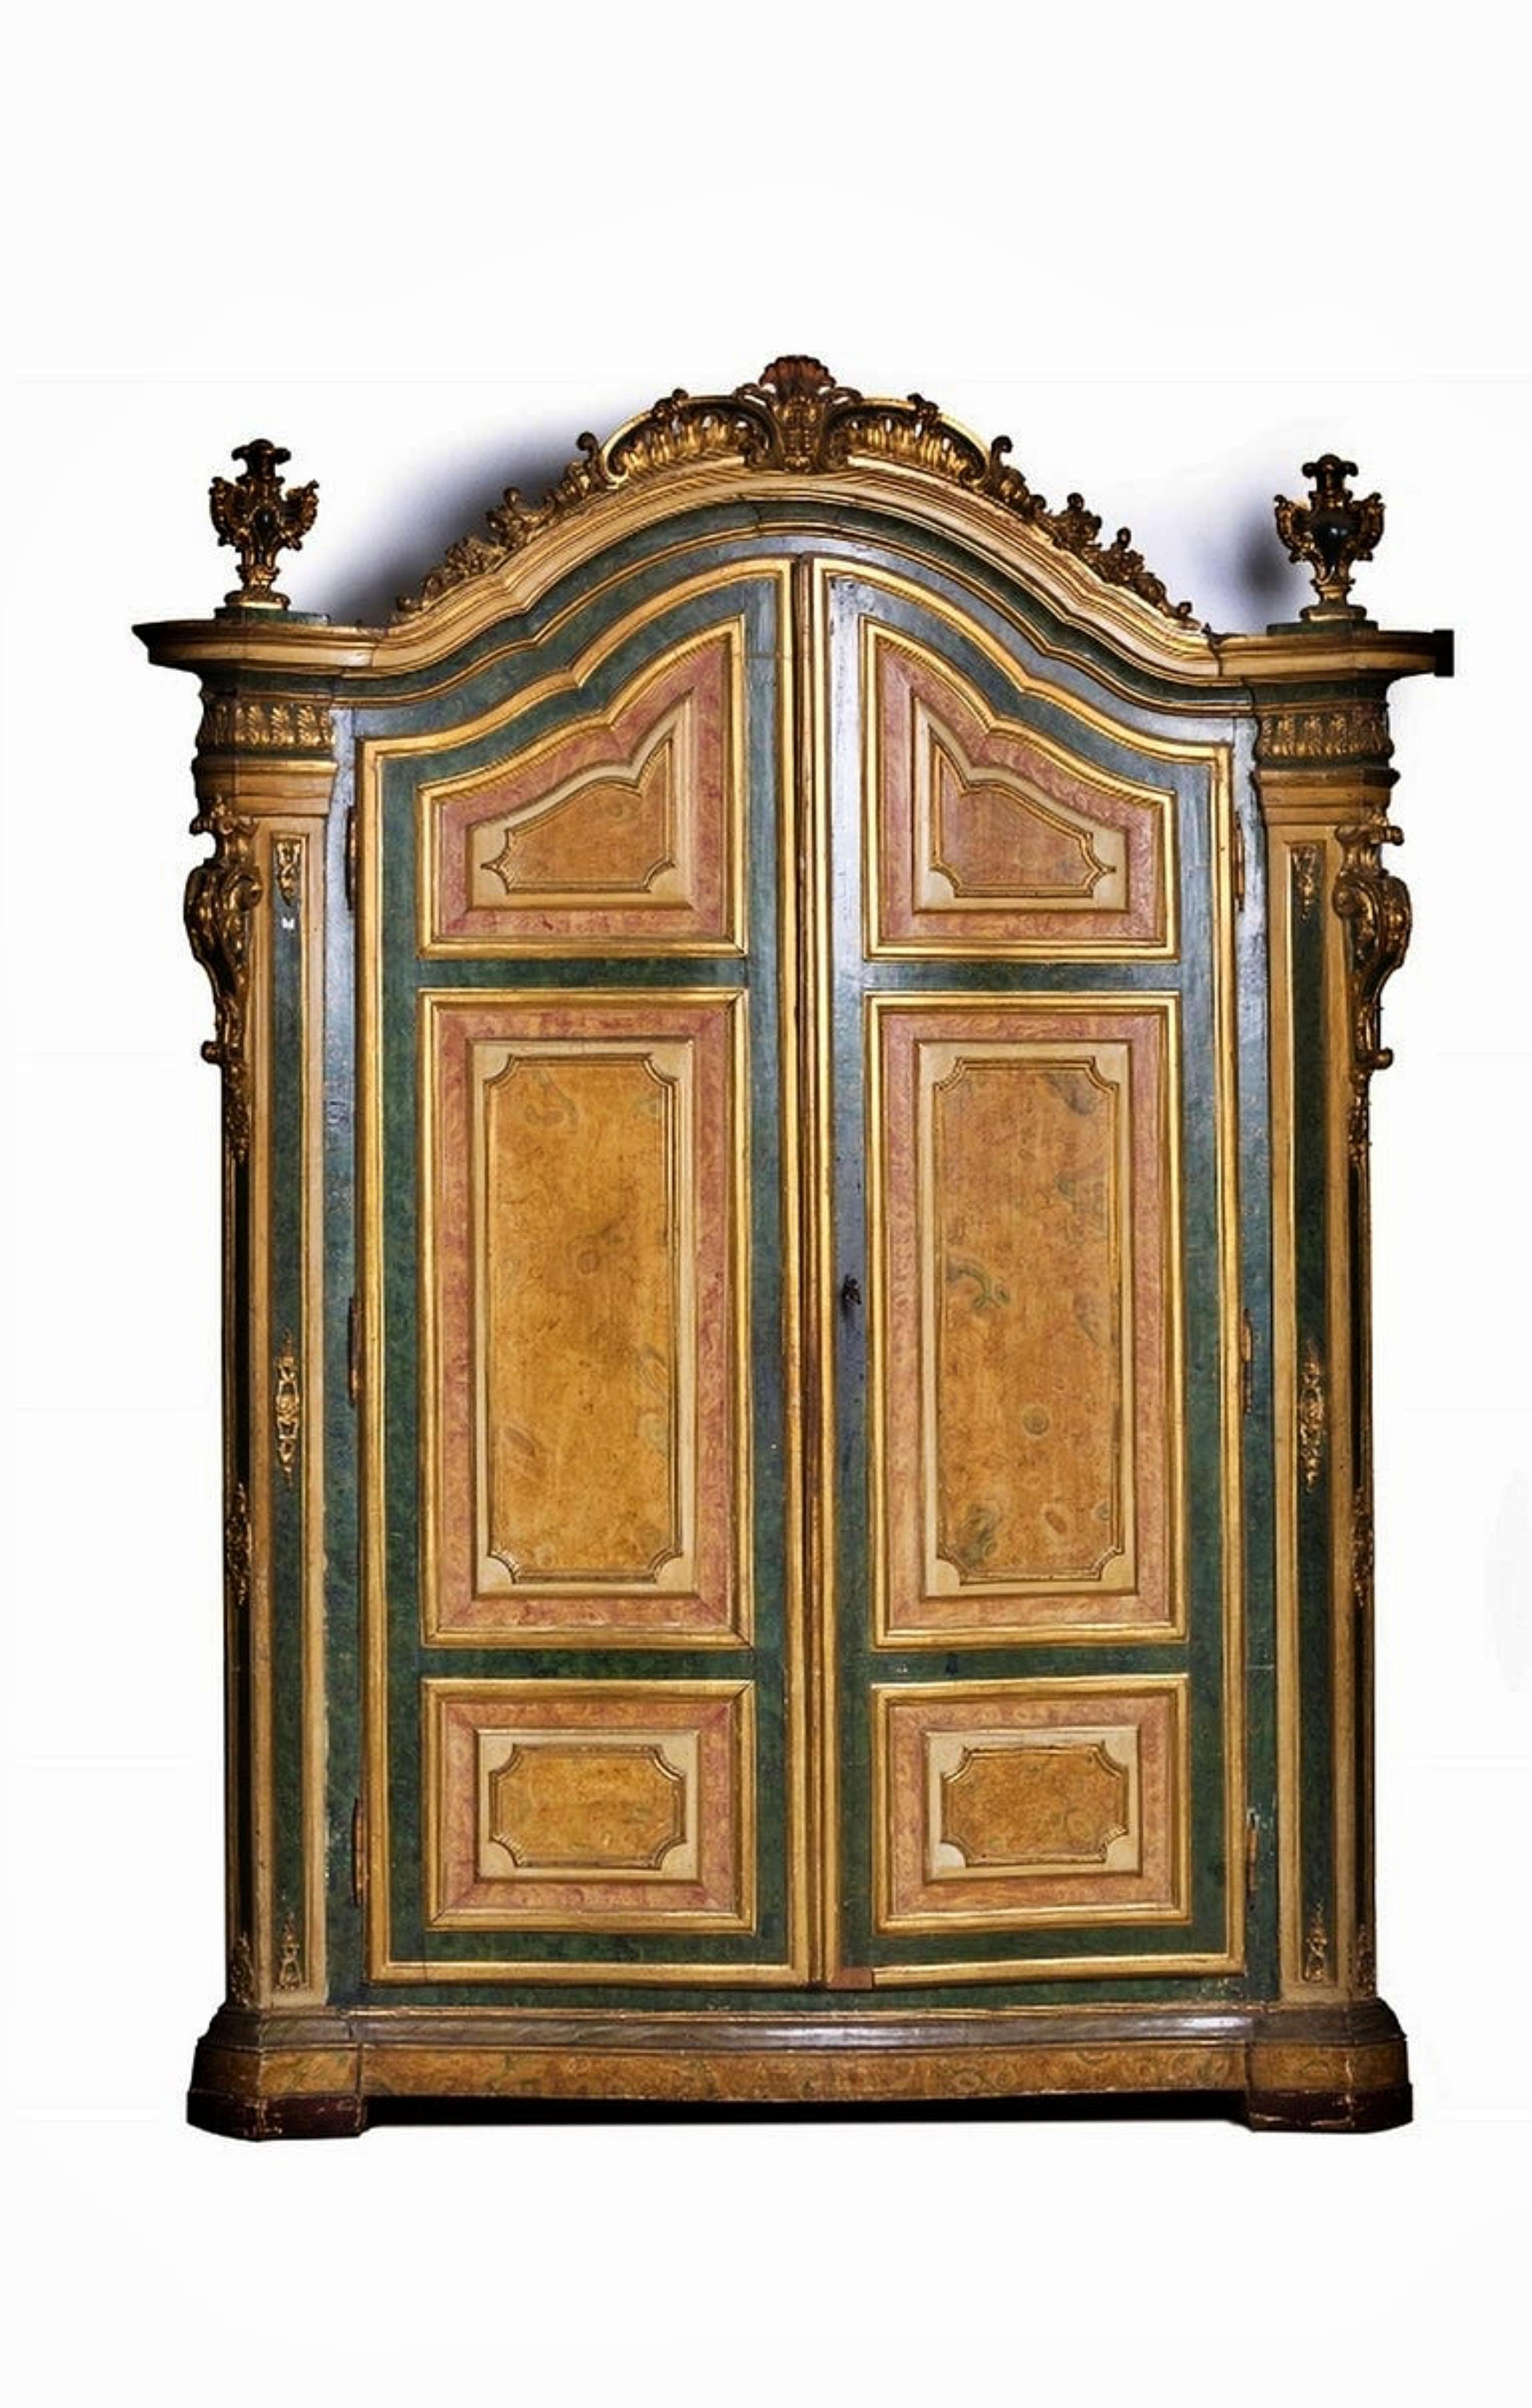 Rare Church cabinet
Portuguese 18th century
in painted, carved and gilded wood.
Wardrobe with two doors. Interior with three drawers.
Elevation with frame in carved and gilded wood.
Minor Defects.
Measures: 277 x 190 x 67 cm
Cabinet published in